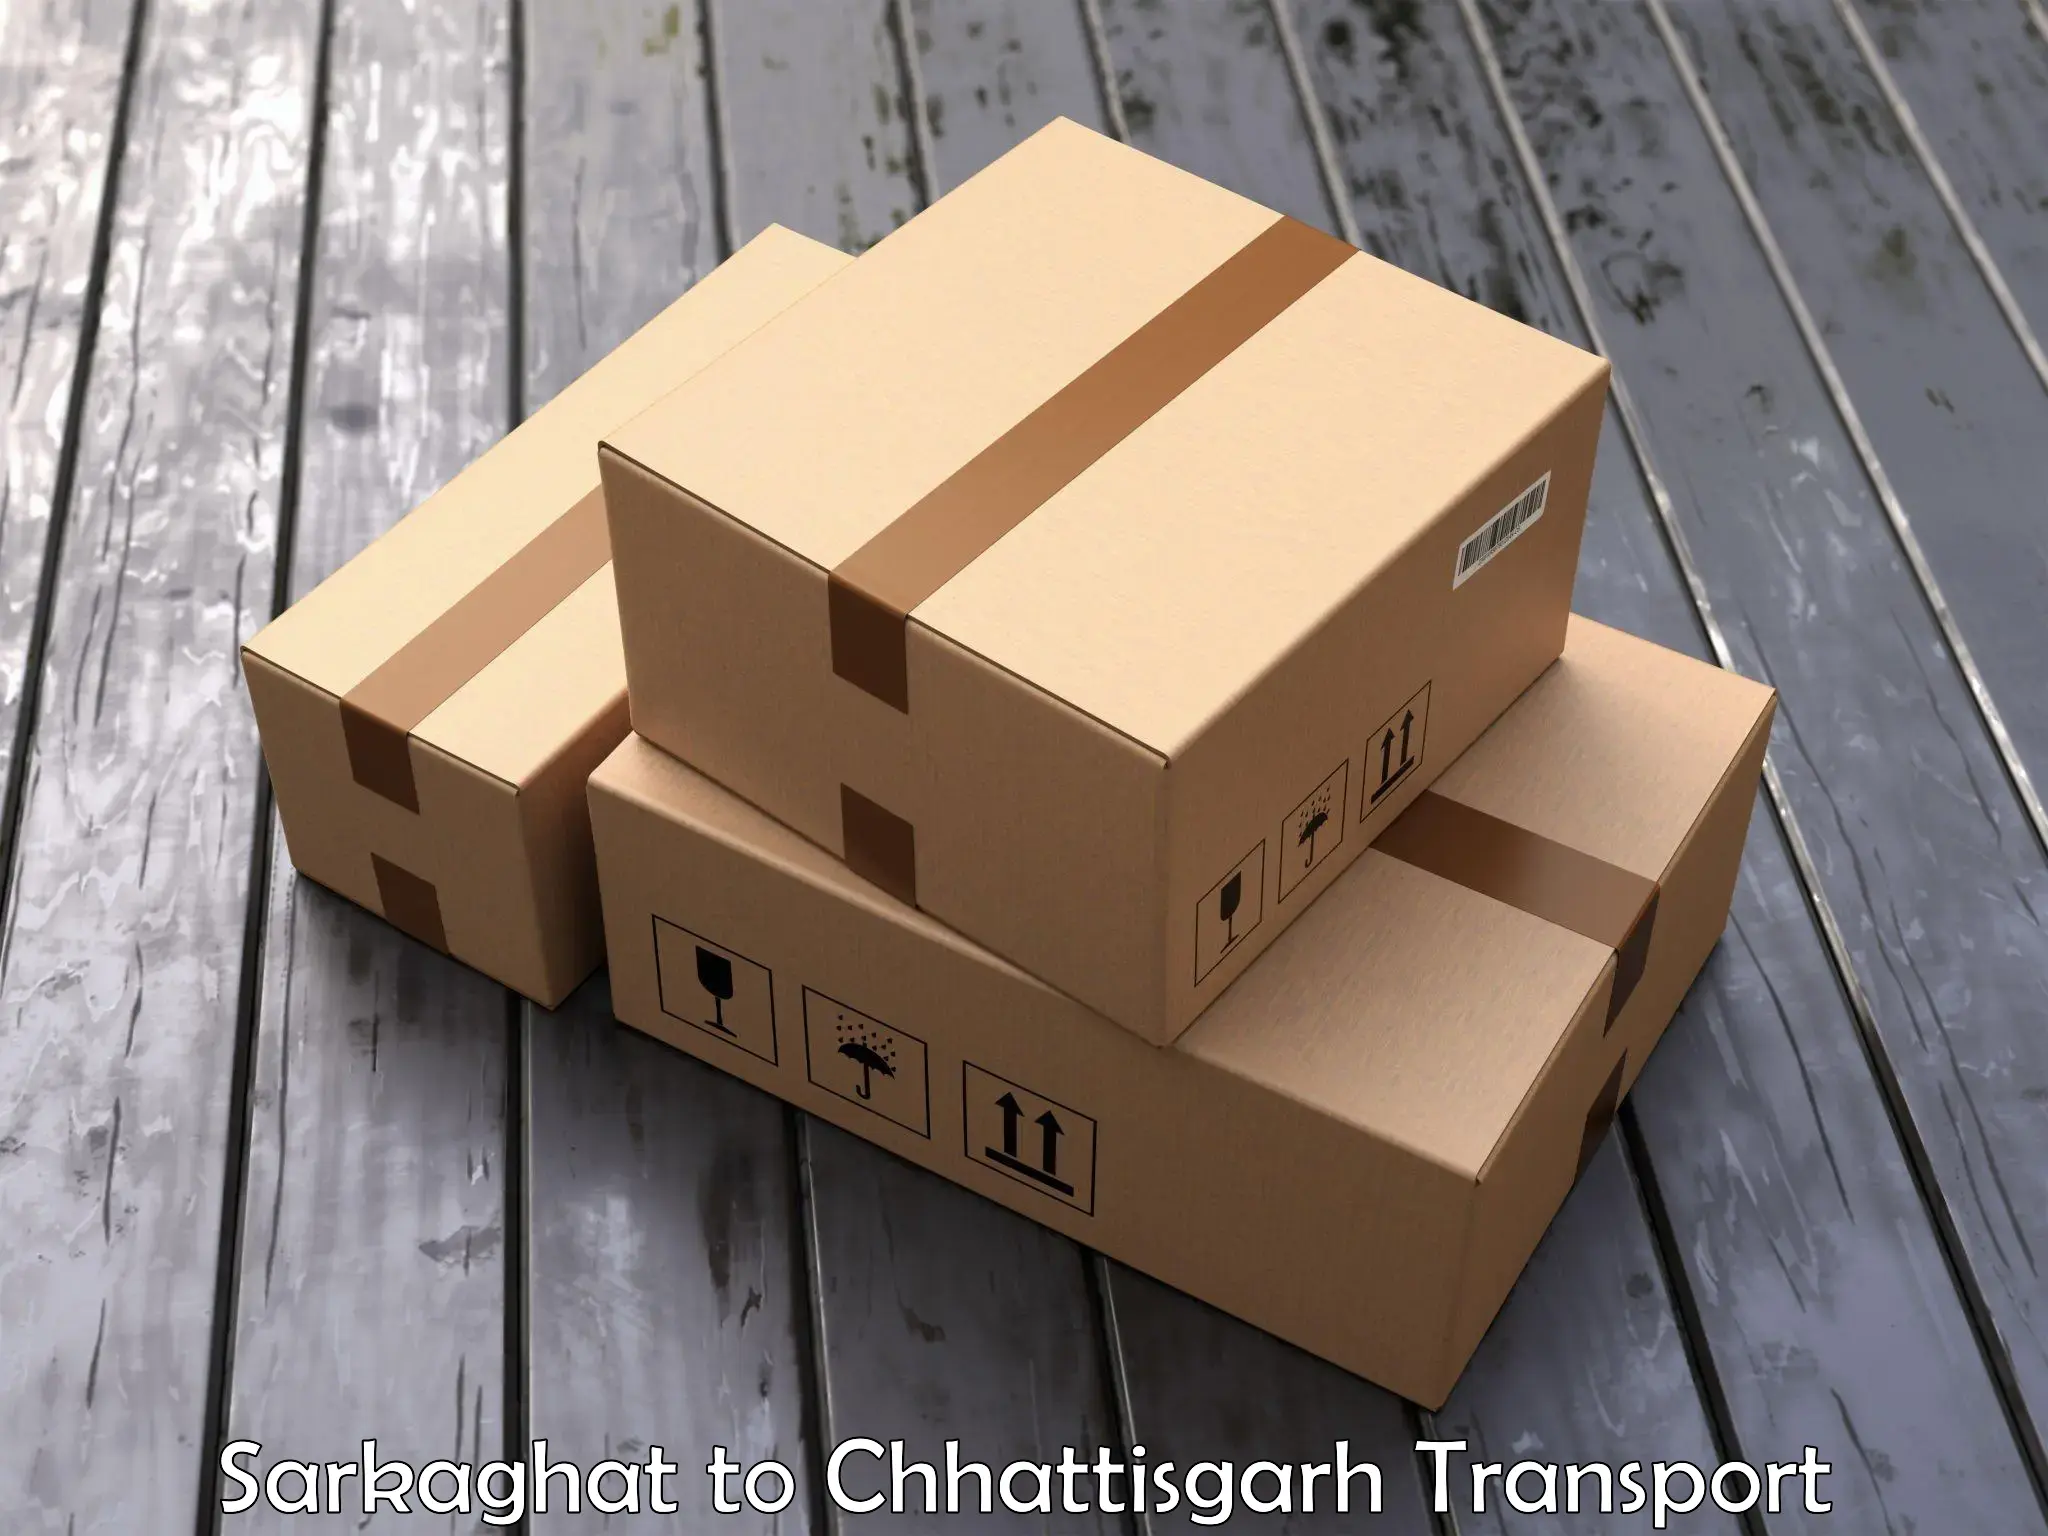 Truck transport companies in India Sarkaghat to Chhattisgarh